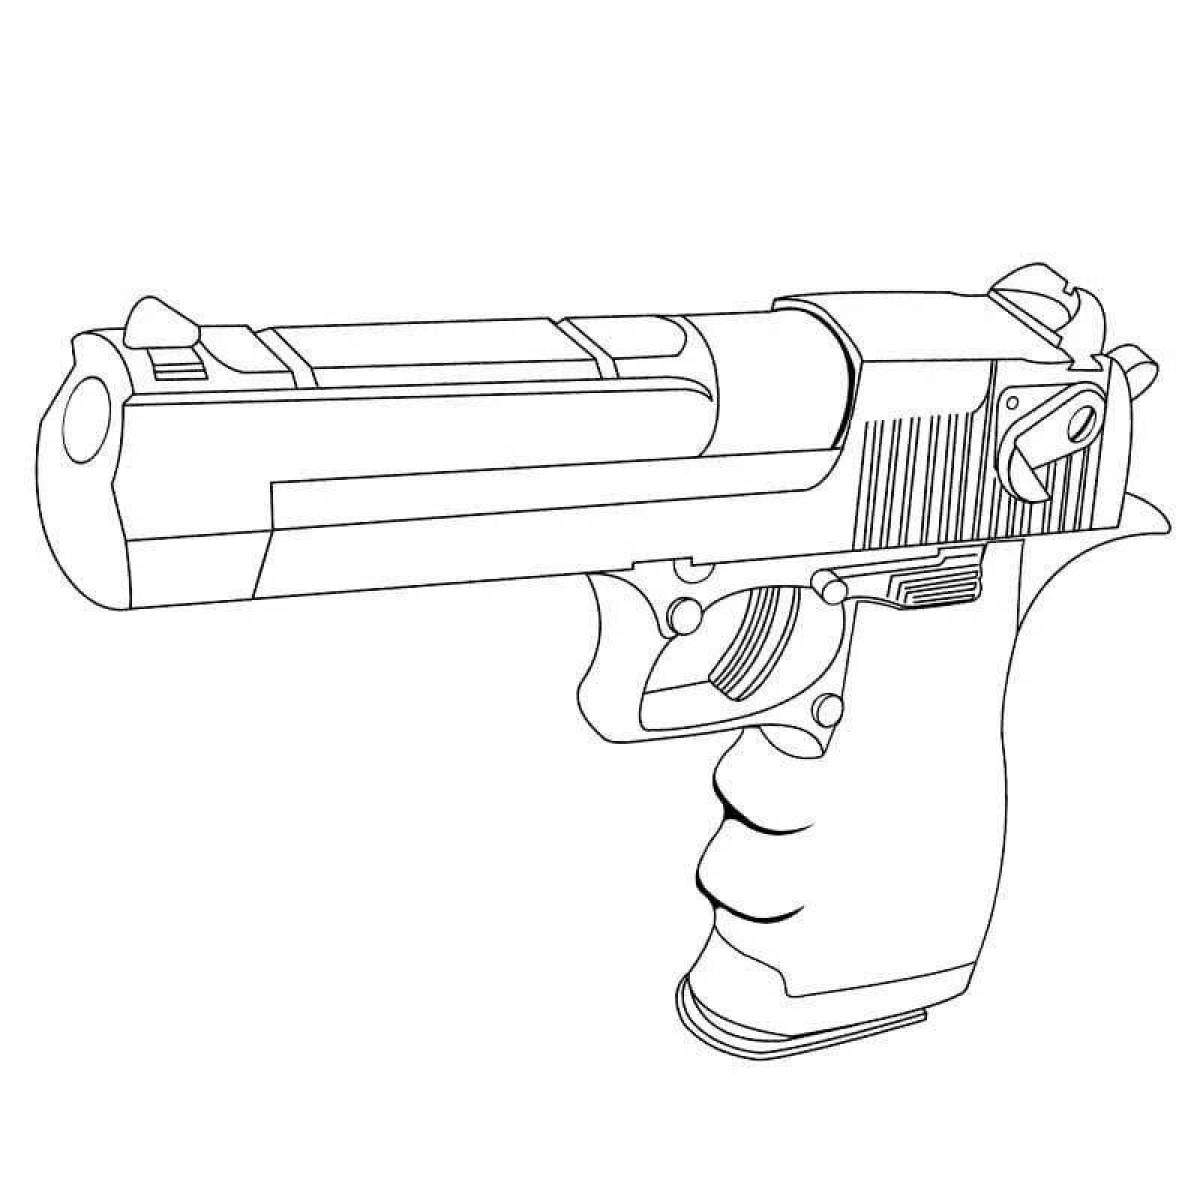 Awesome weapon coloring pages for kids